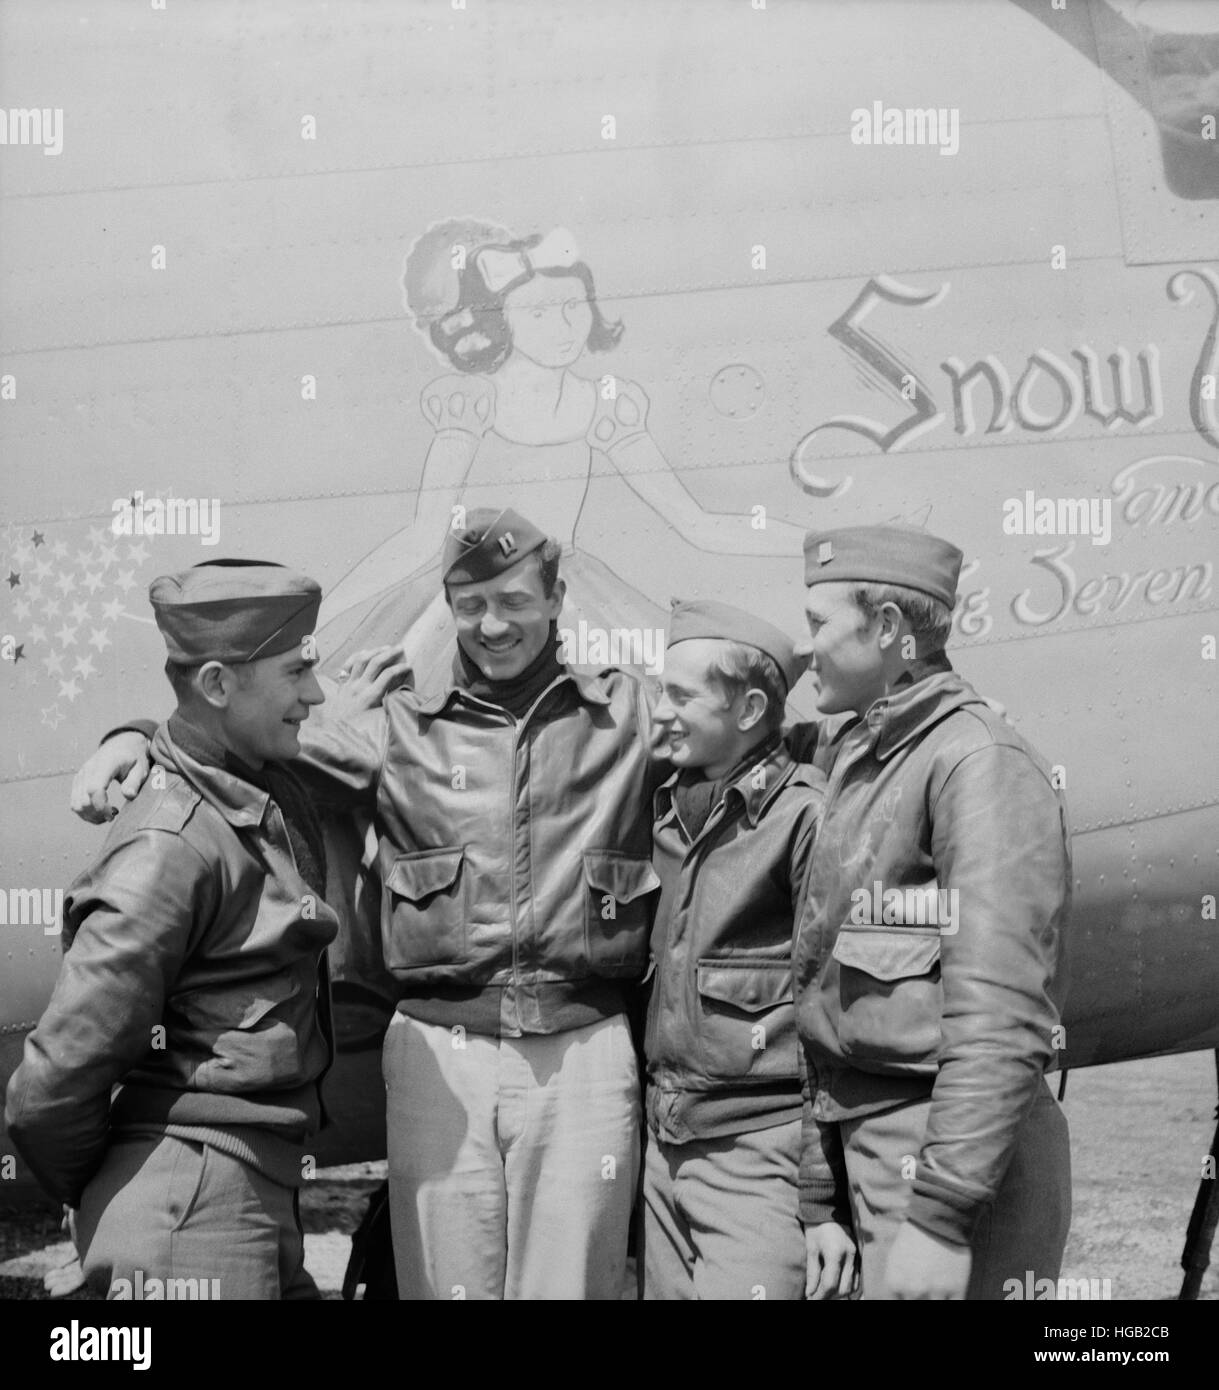 Crewmembers of a B-24 bomber of the U.S. Army 9th Air Force, 1943. Stock Photo